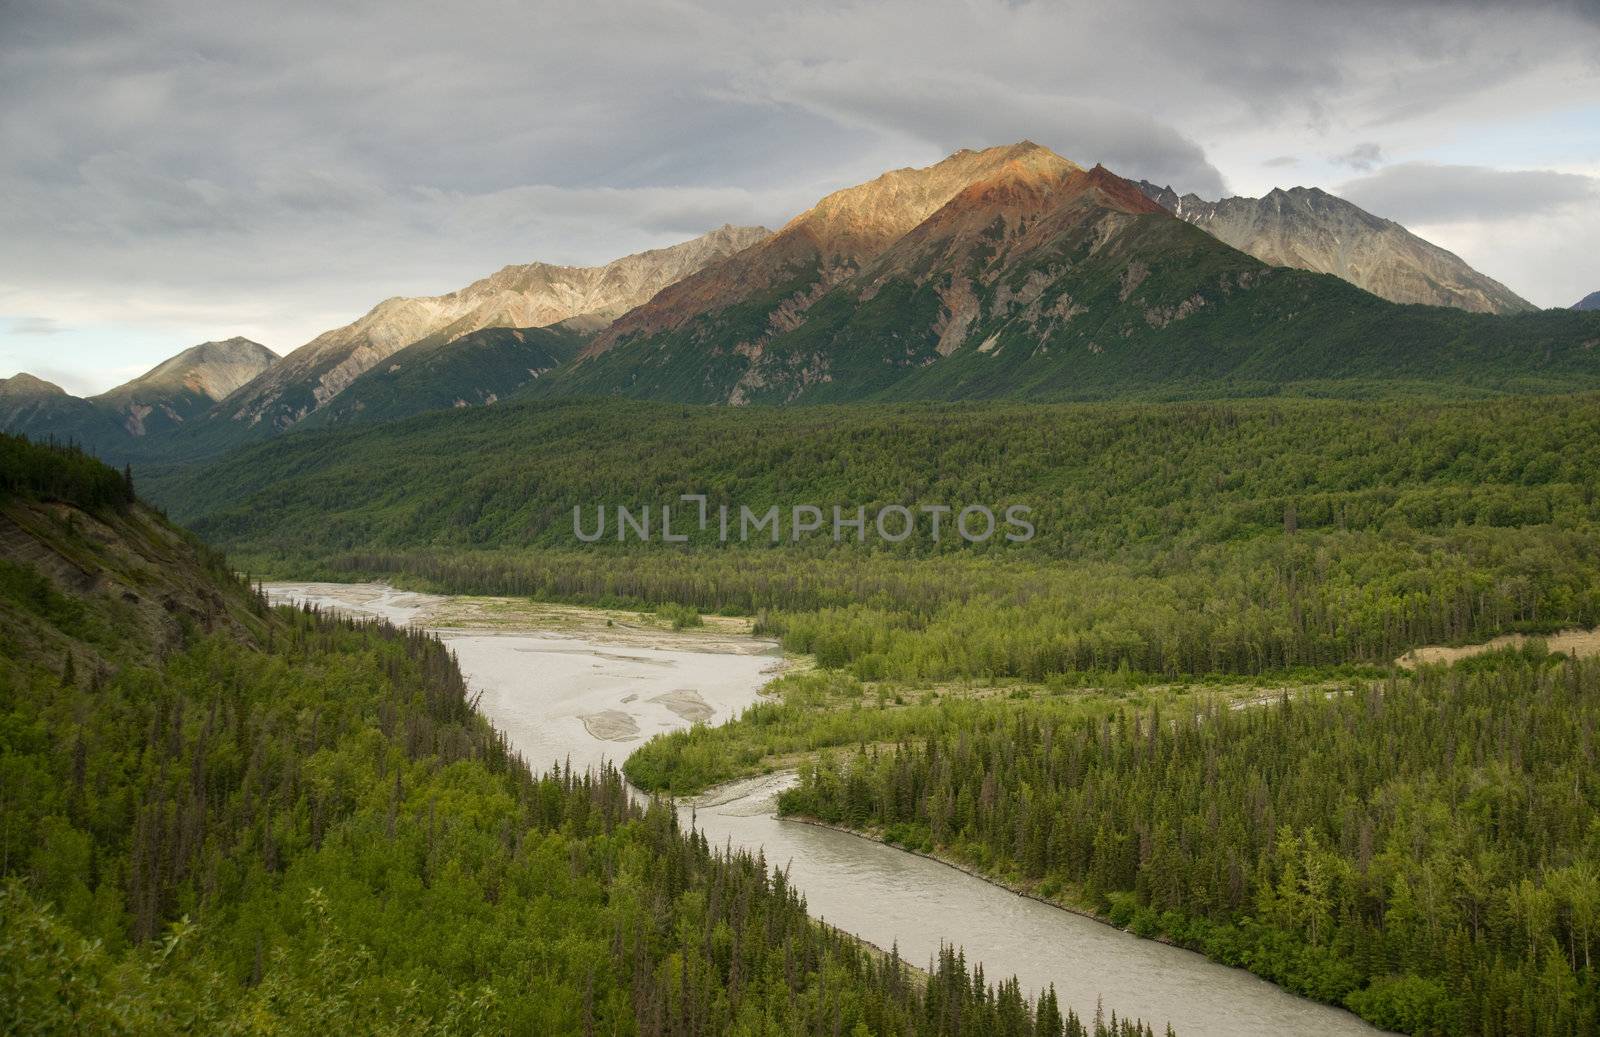 The Matanuska River cuts Through Woods at Chugach Mountains Base by ChrisBoswell